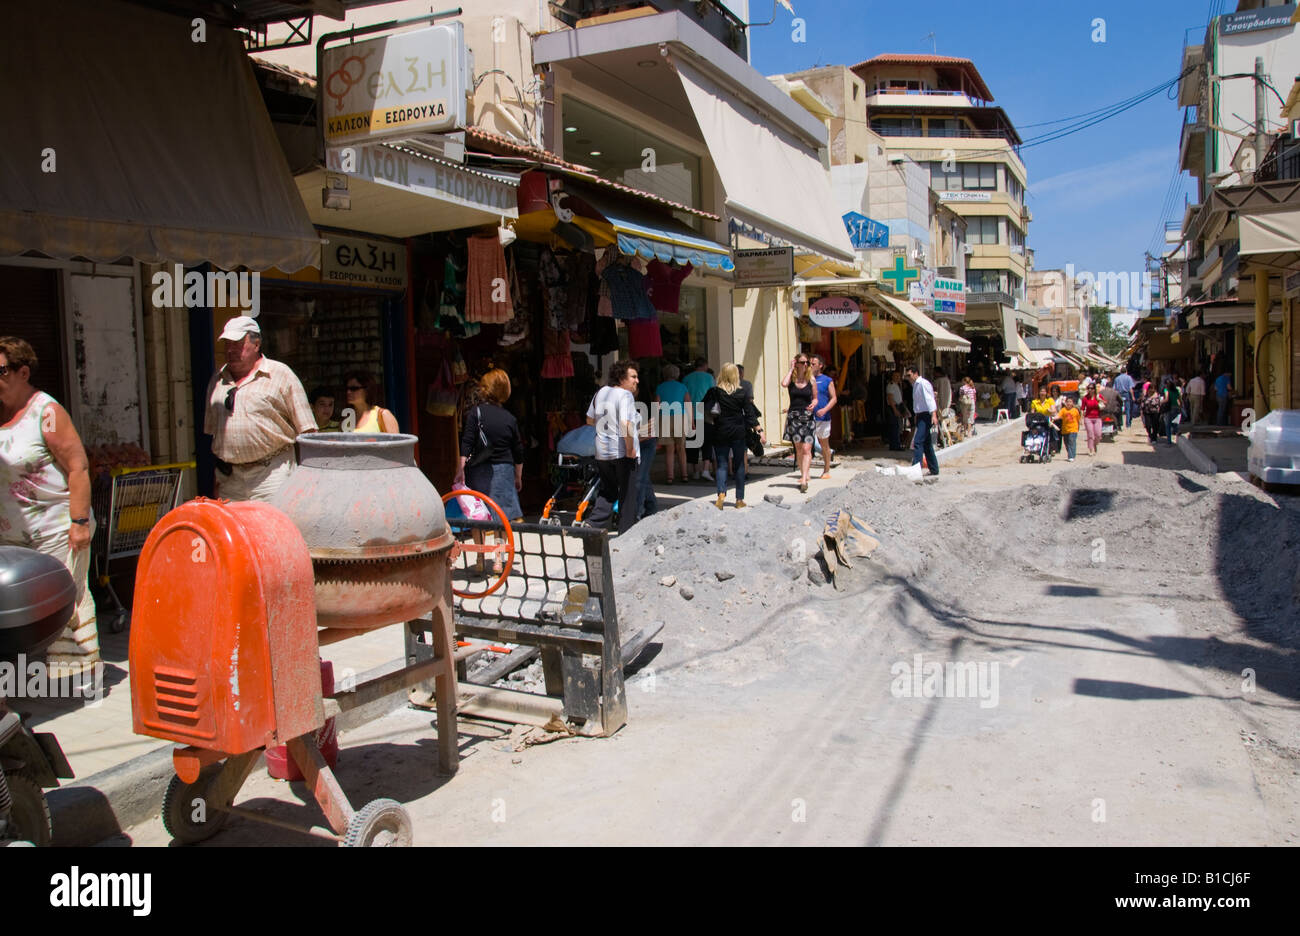 Heraklion Market High Resolution Stock Photography and Images - Alamy